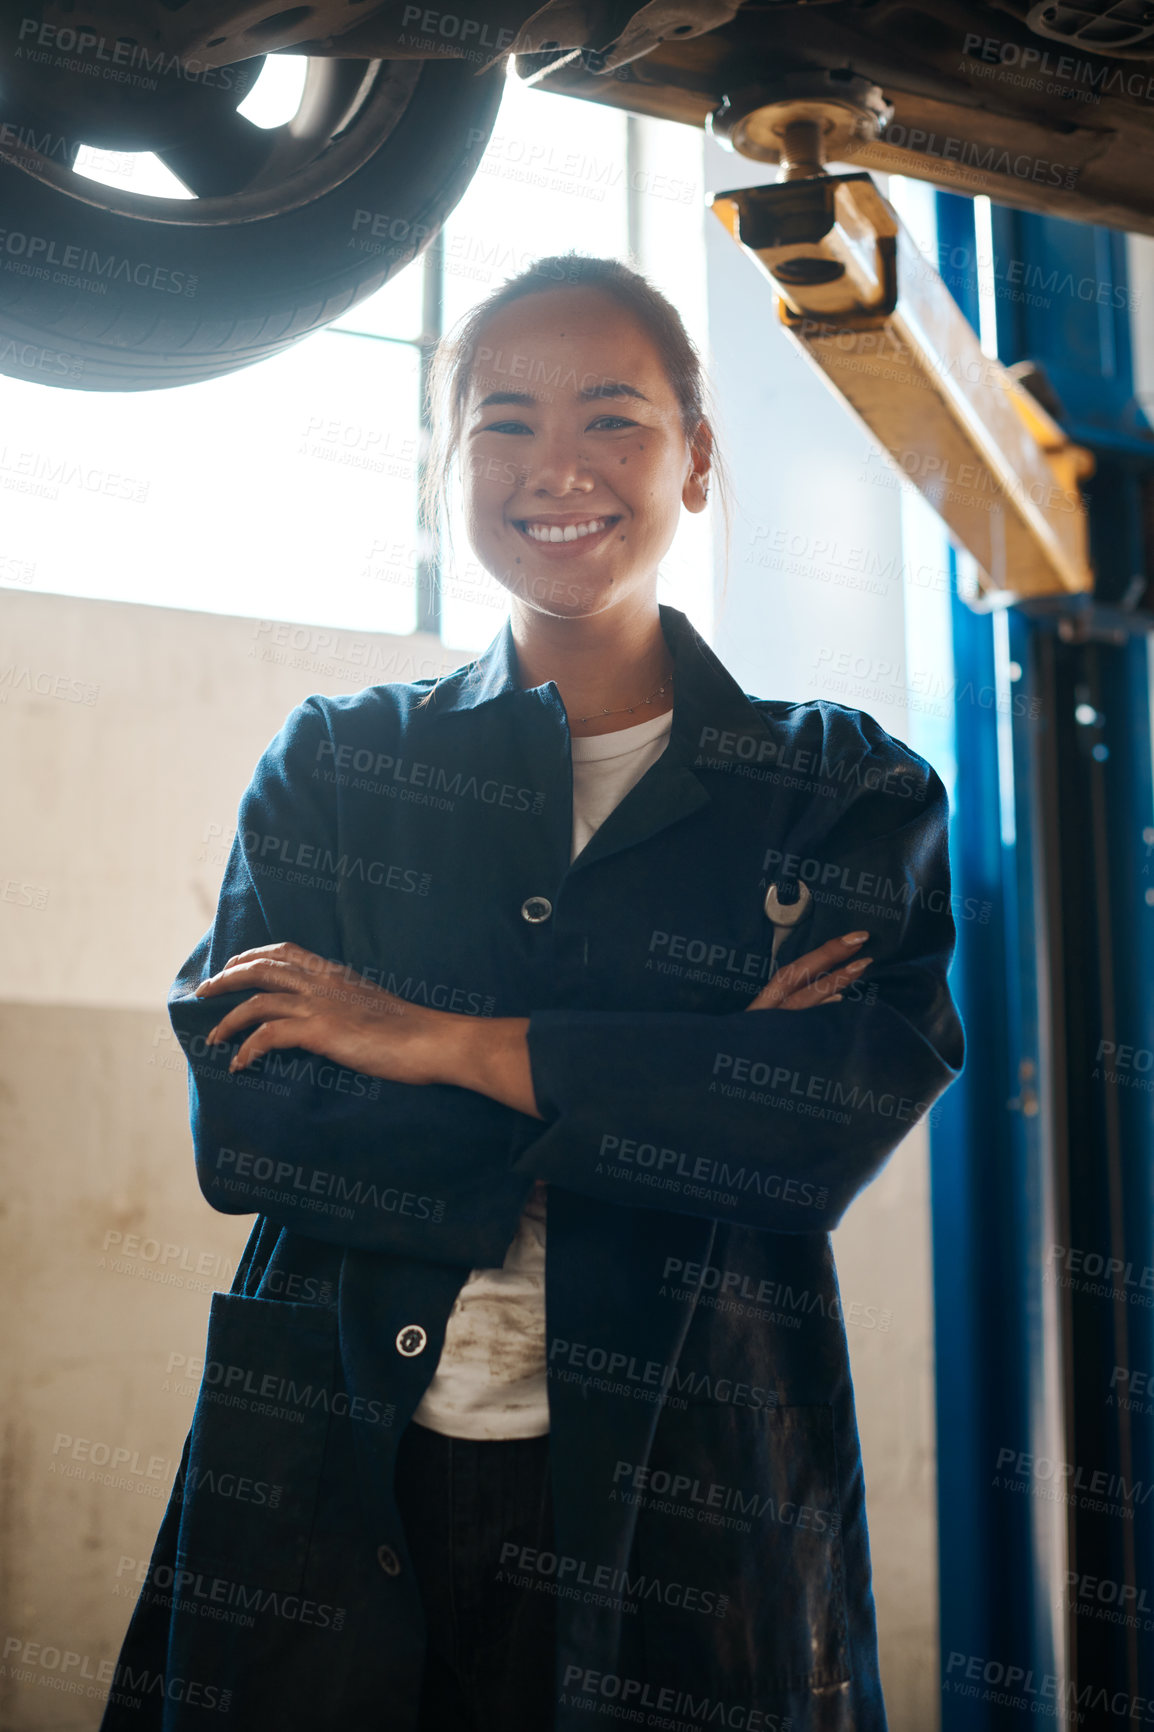 Buy stock photo Shot of a female mechanic posing with her arms crossed in an auto repair shop